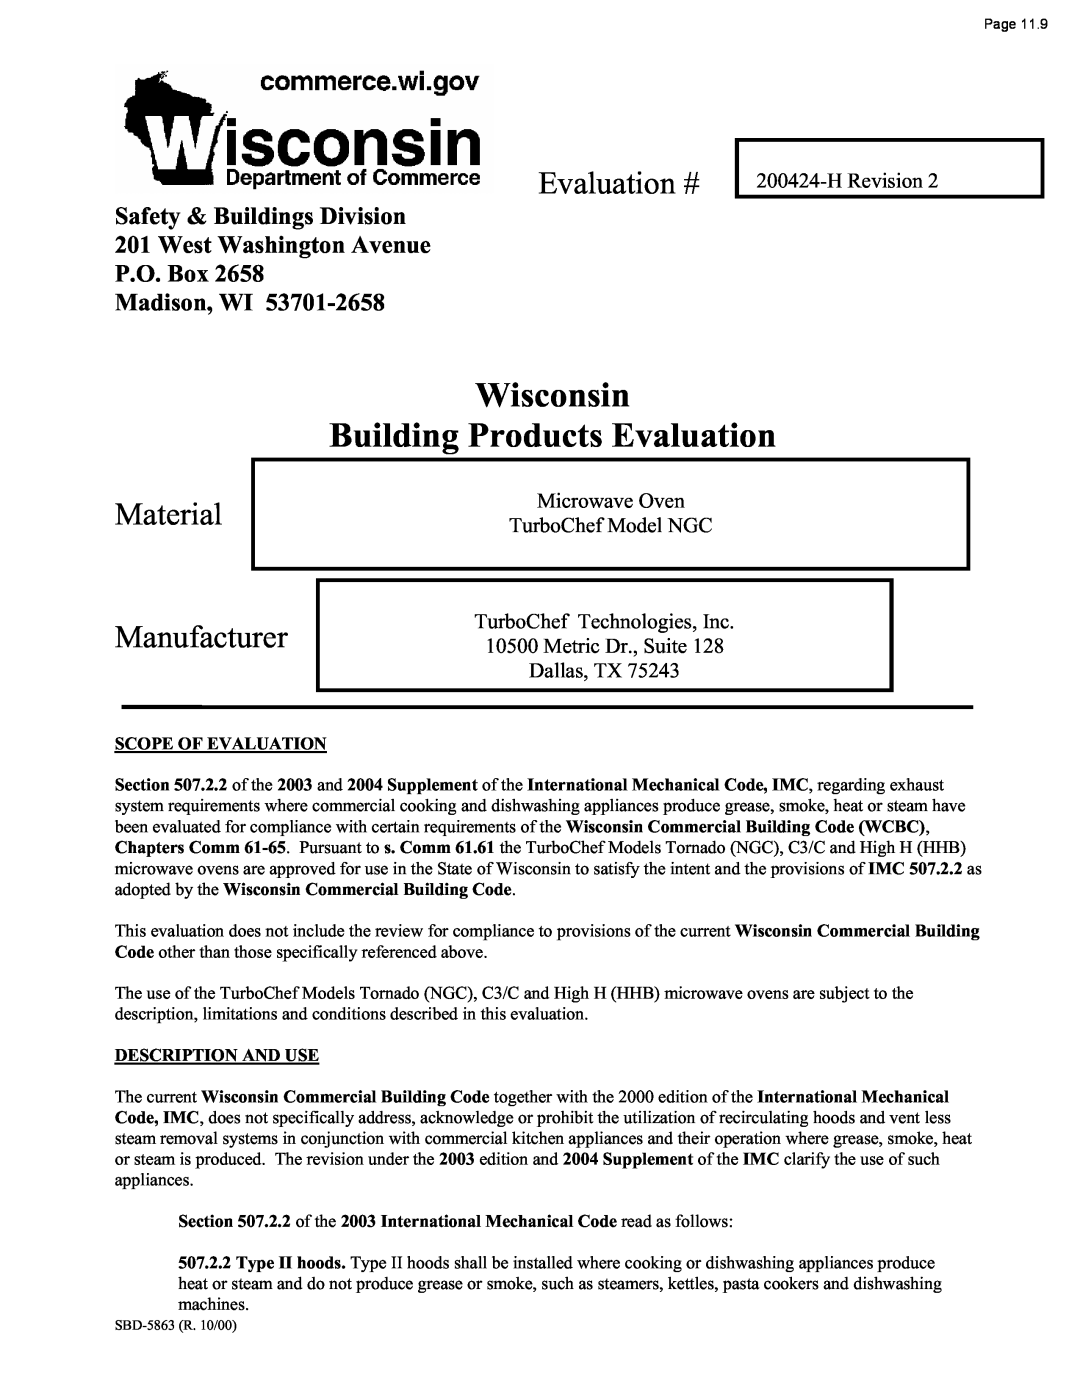 Turbo Chef Technologies Tornado Wisconsin Building Products Evaluation, Evaluation #, Material Manufacturer, Madison, WI 